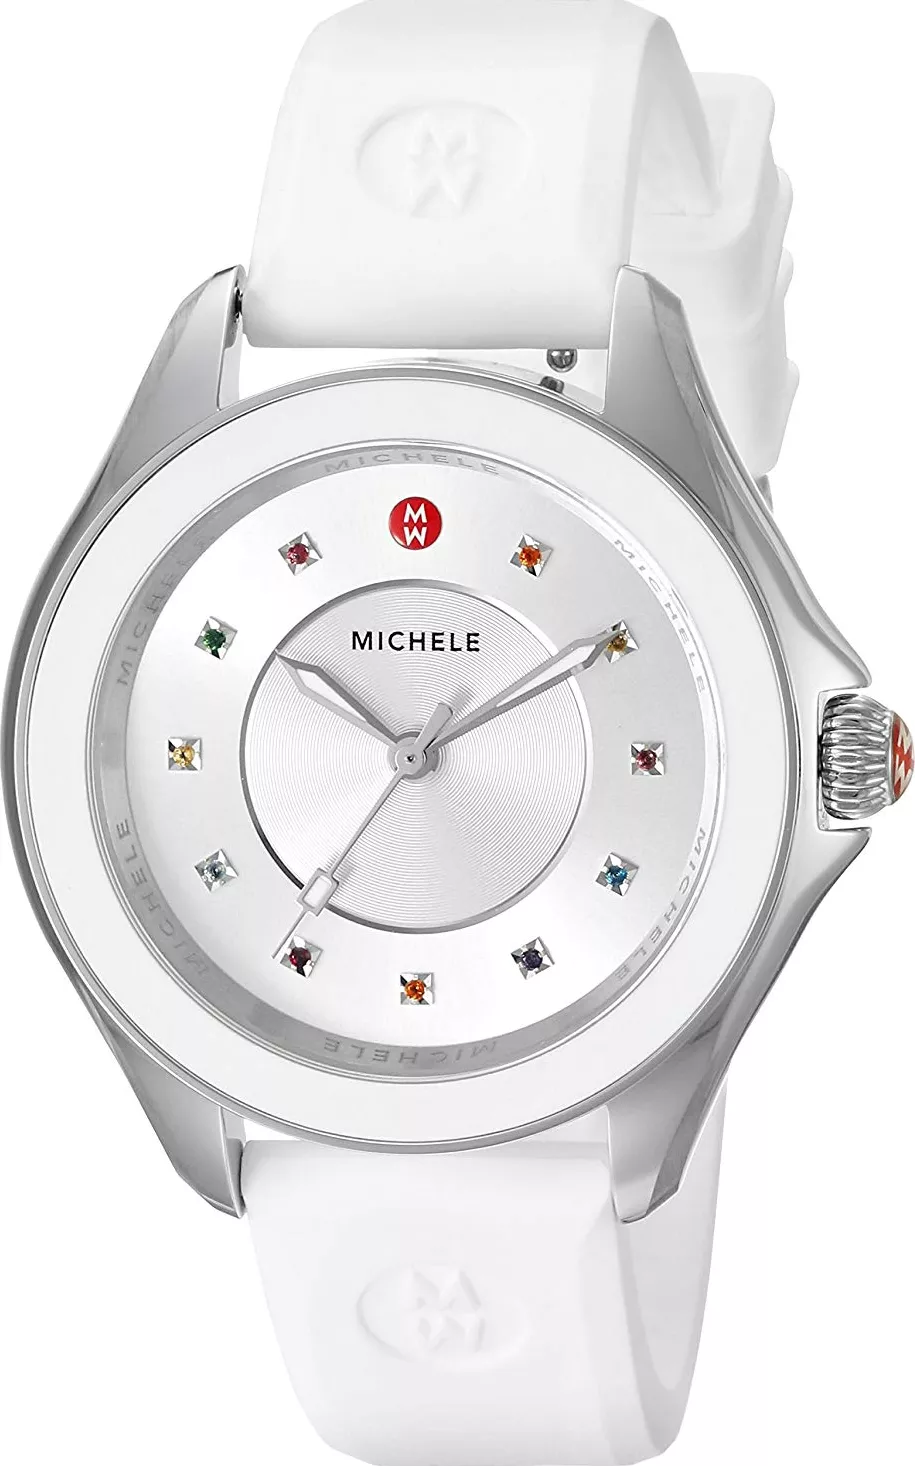  Michele Cape Sunray Dial White Silicone Watch 40mm